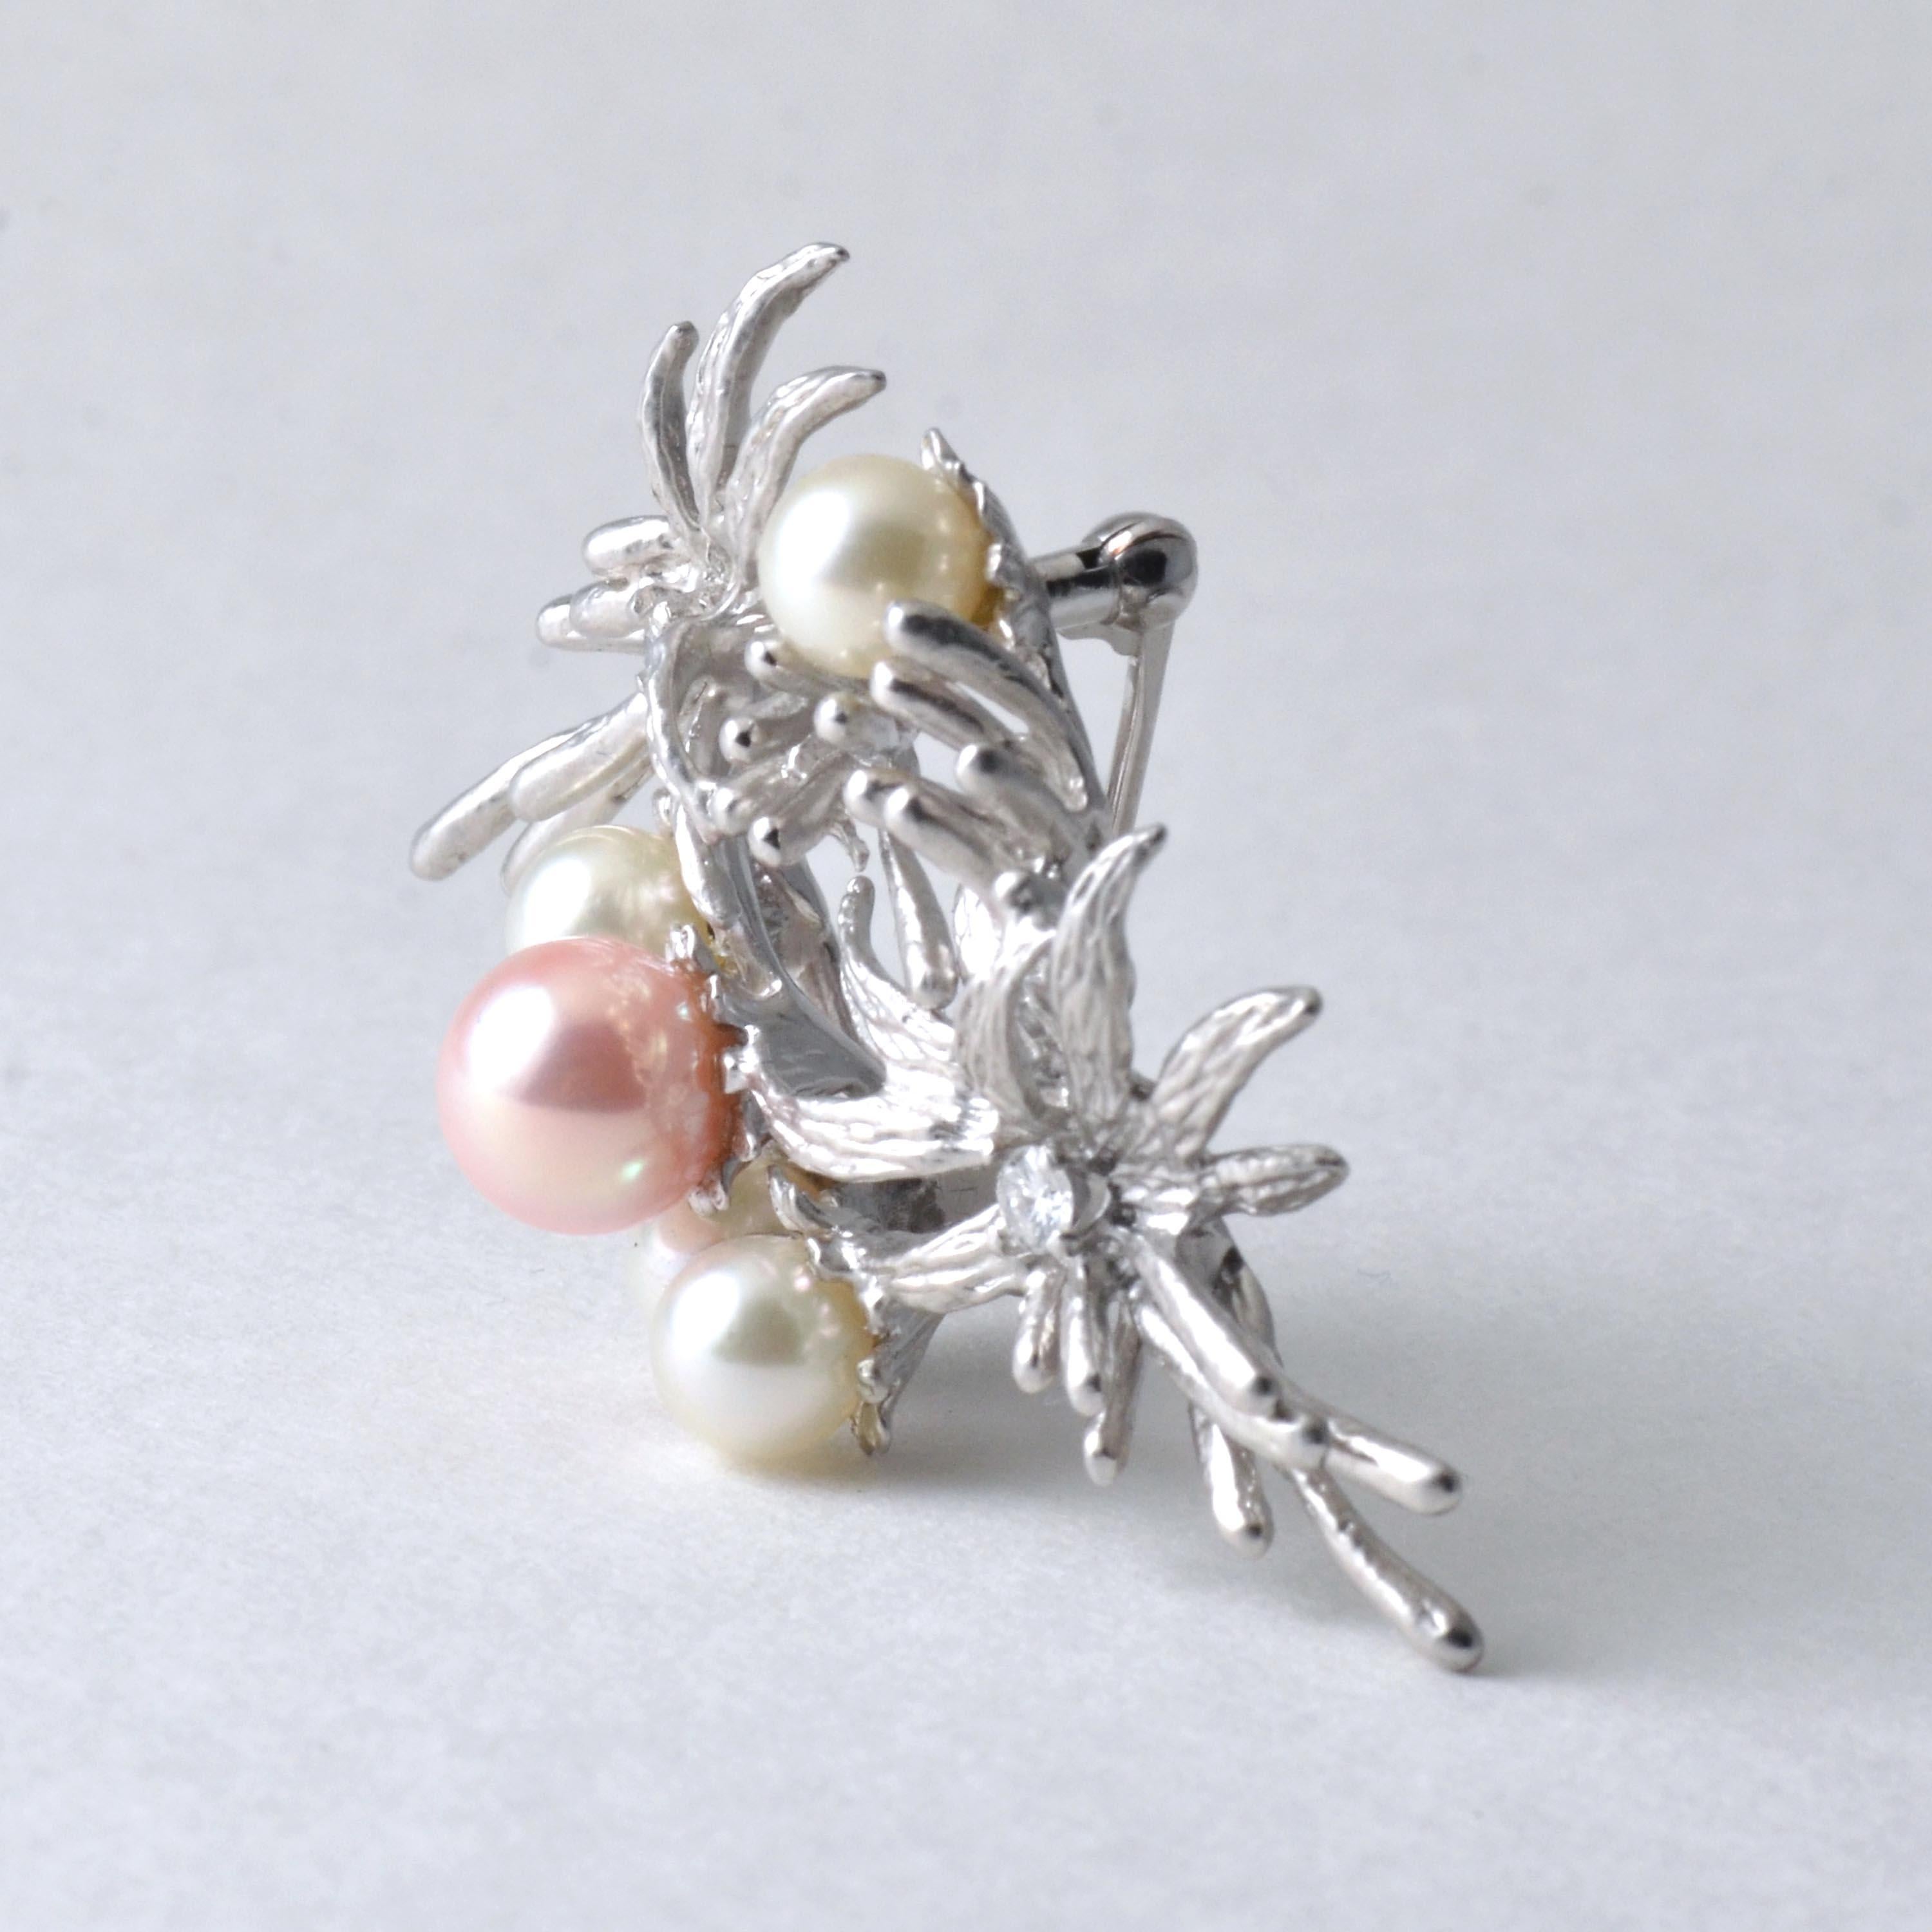 Our original coral core pearl were made in Japan. We named 